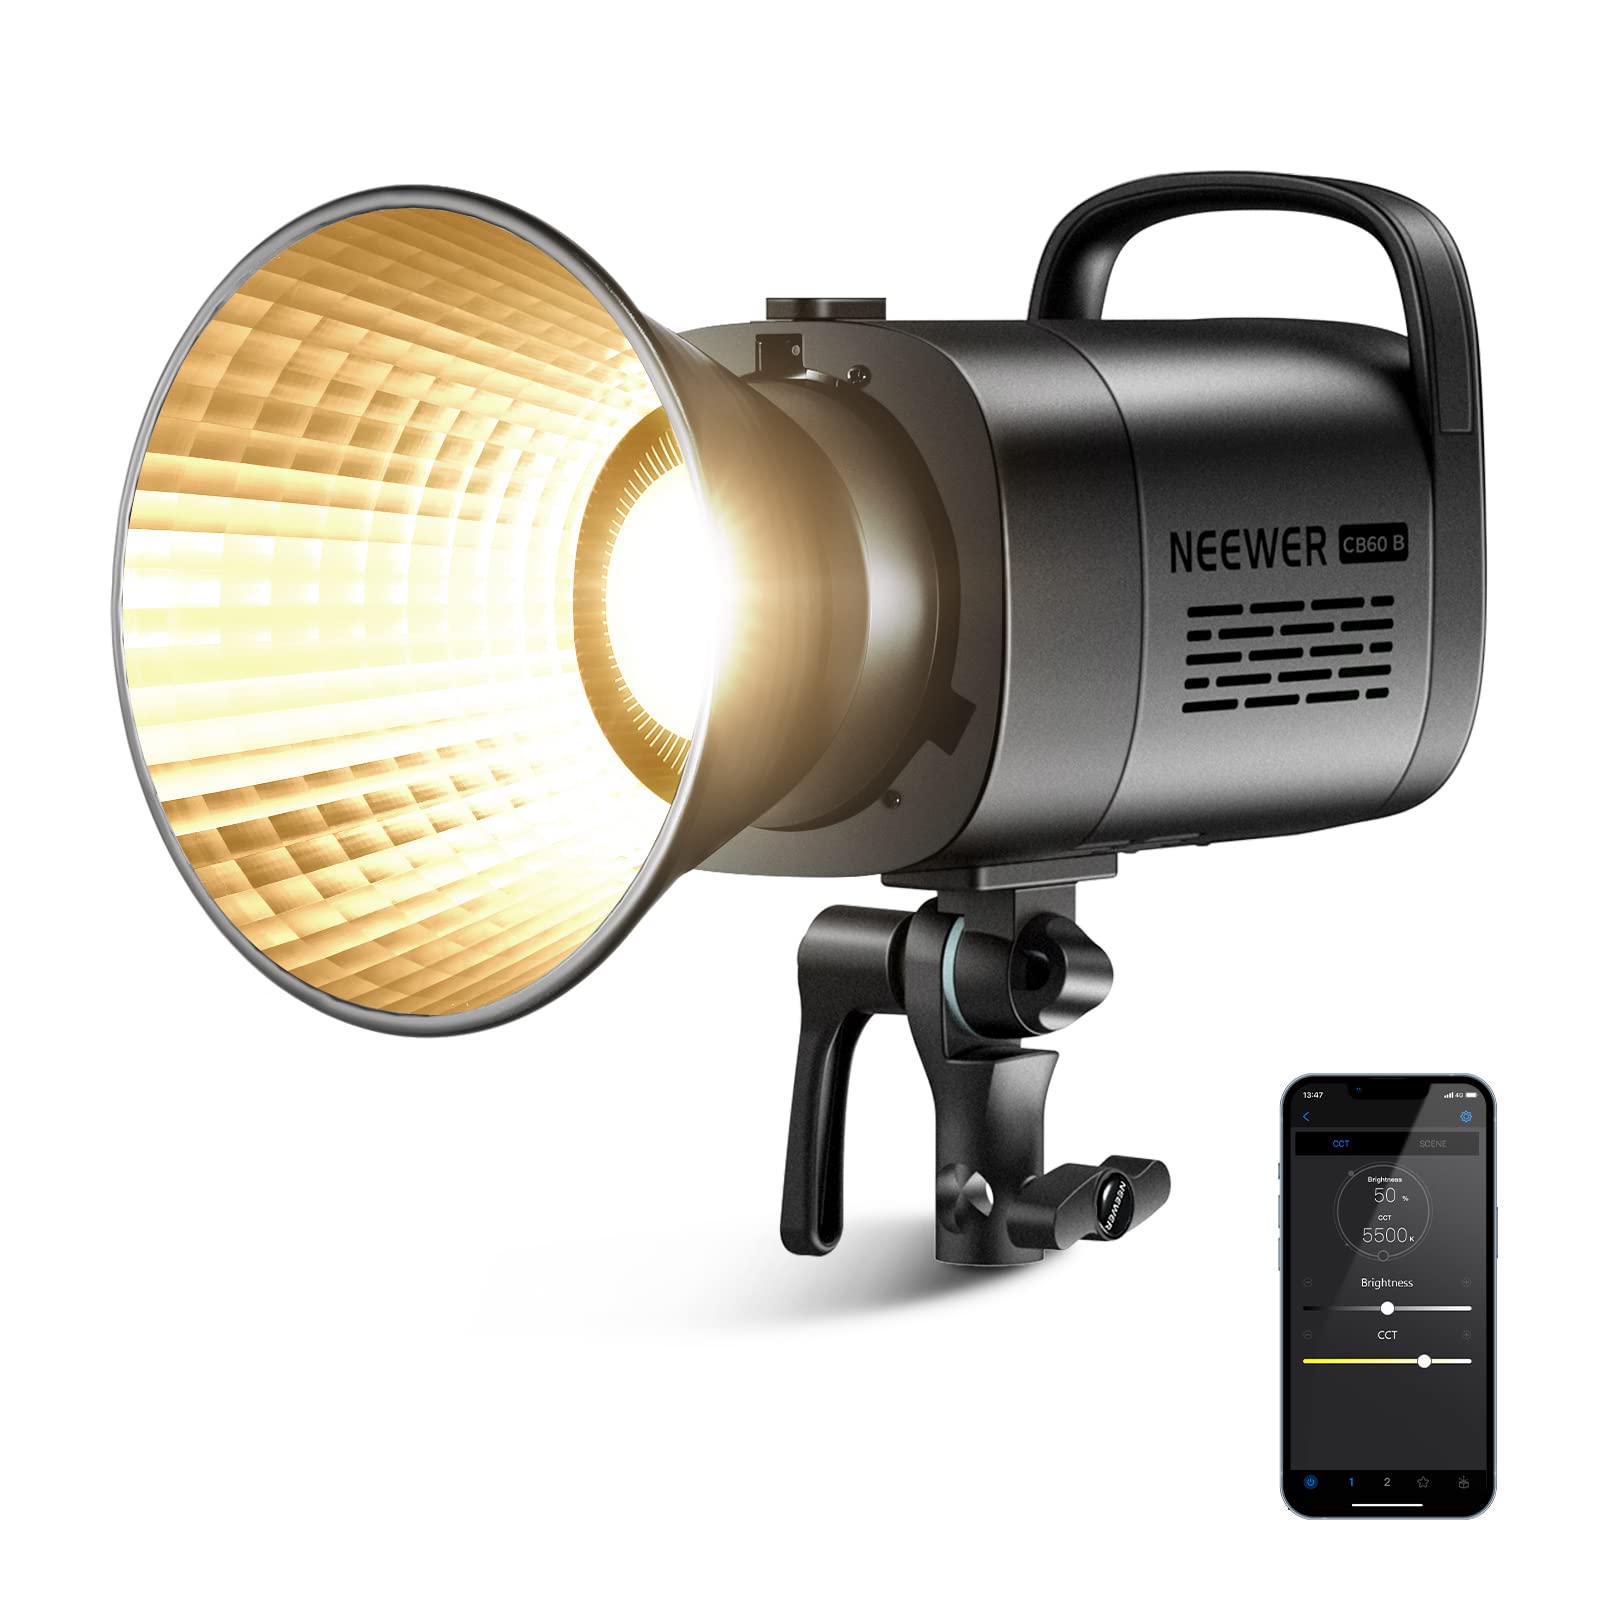 NEEWER CB60B 70W LED Video Light with 35